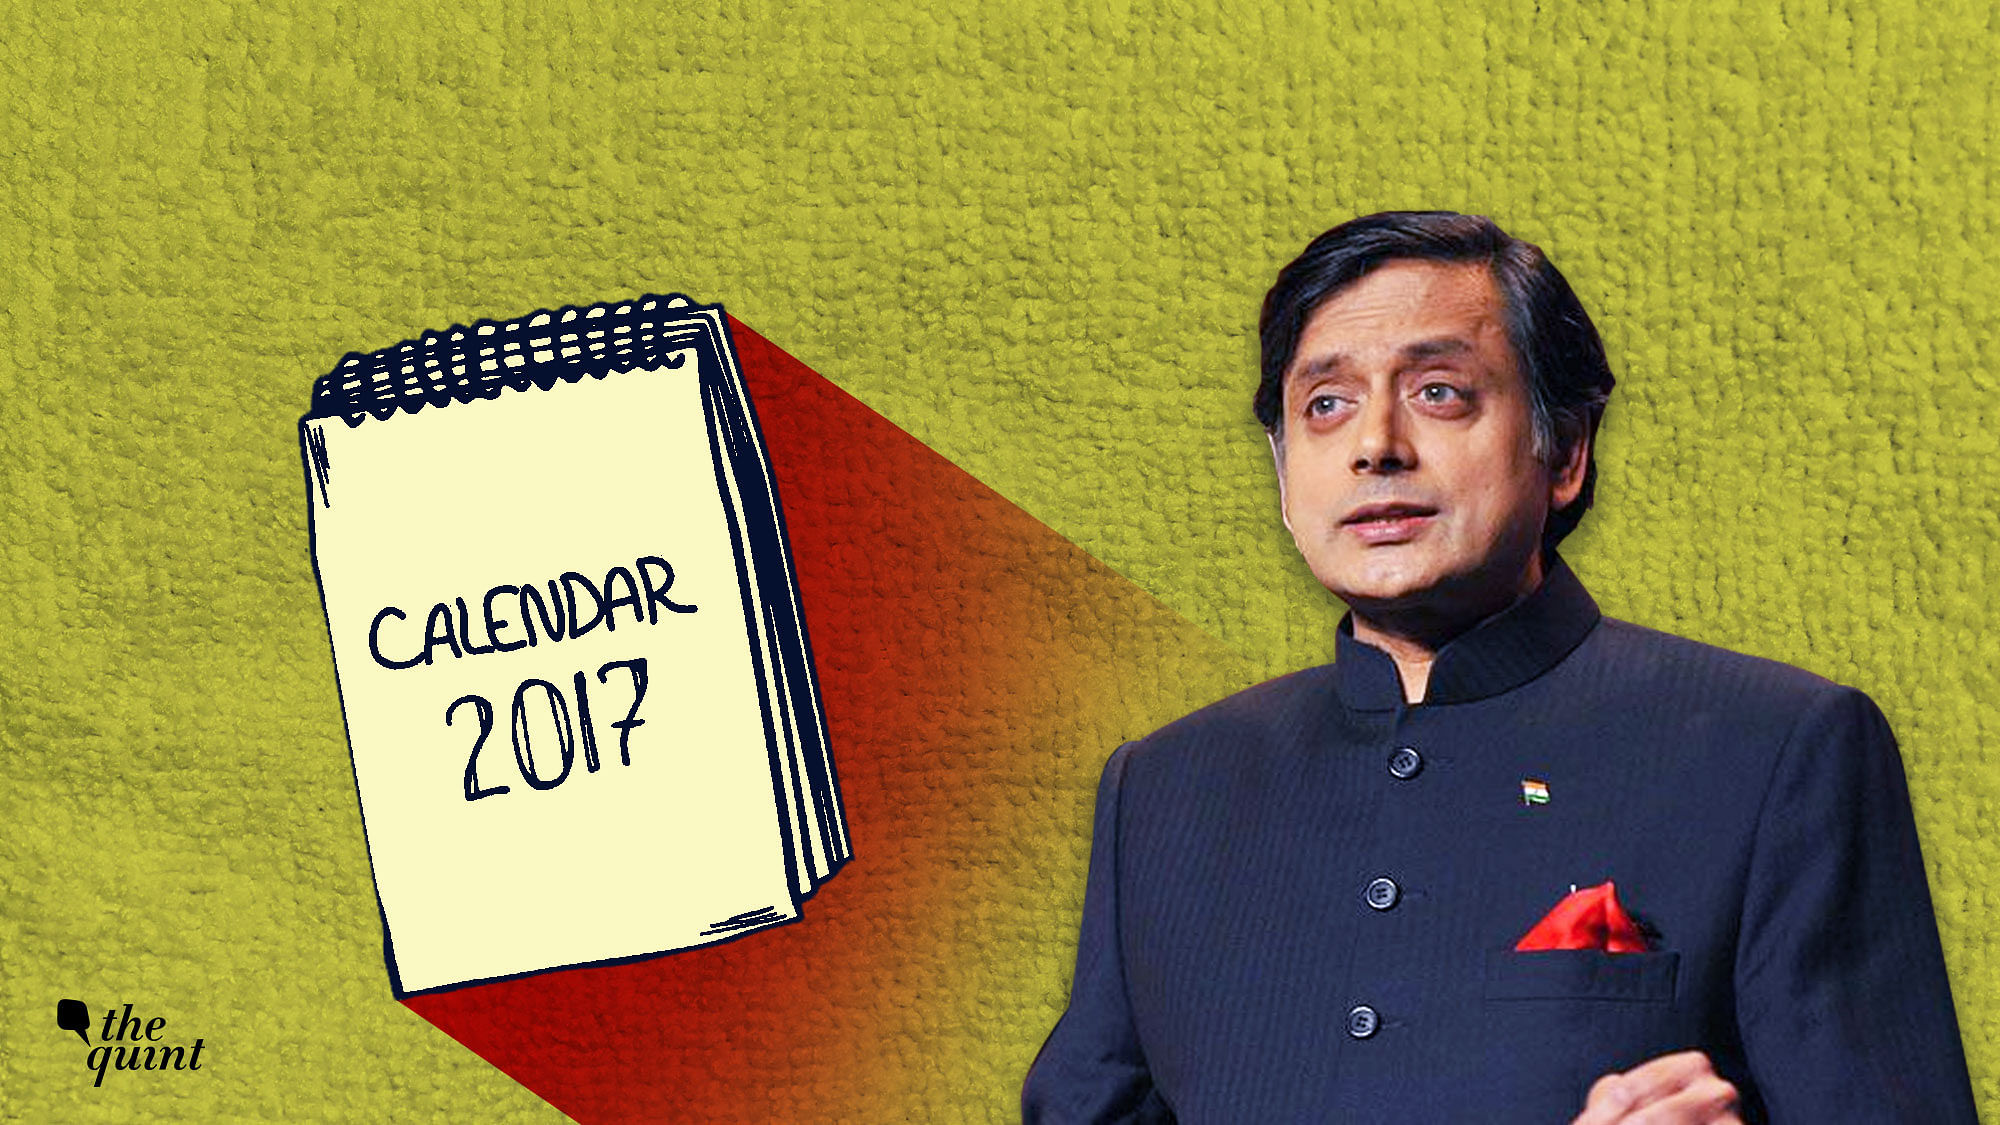 On induction of youngsters in  politics, Shashi Tharoor wrote that India can’t afford continued ‘secession of the professionals.’